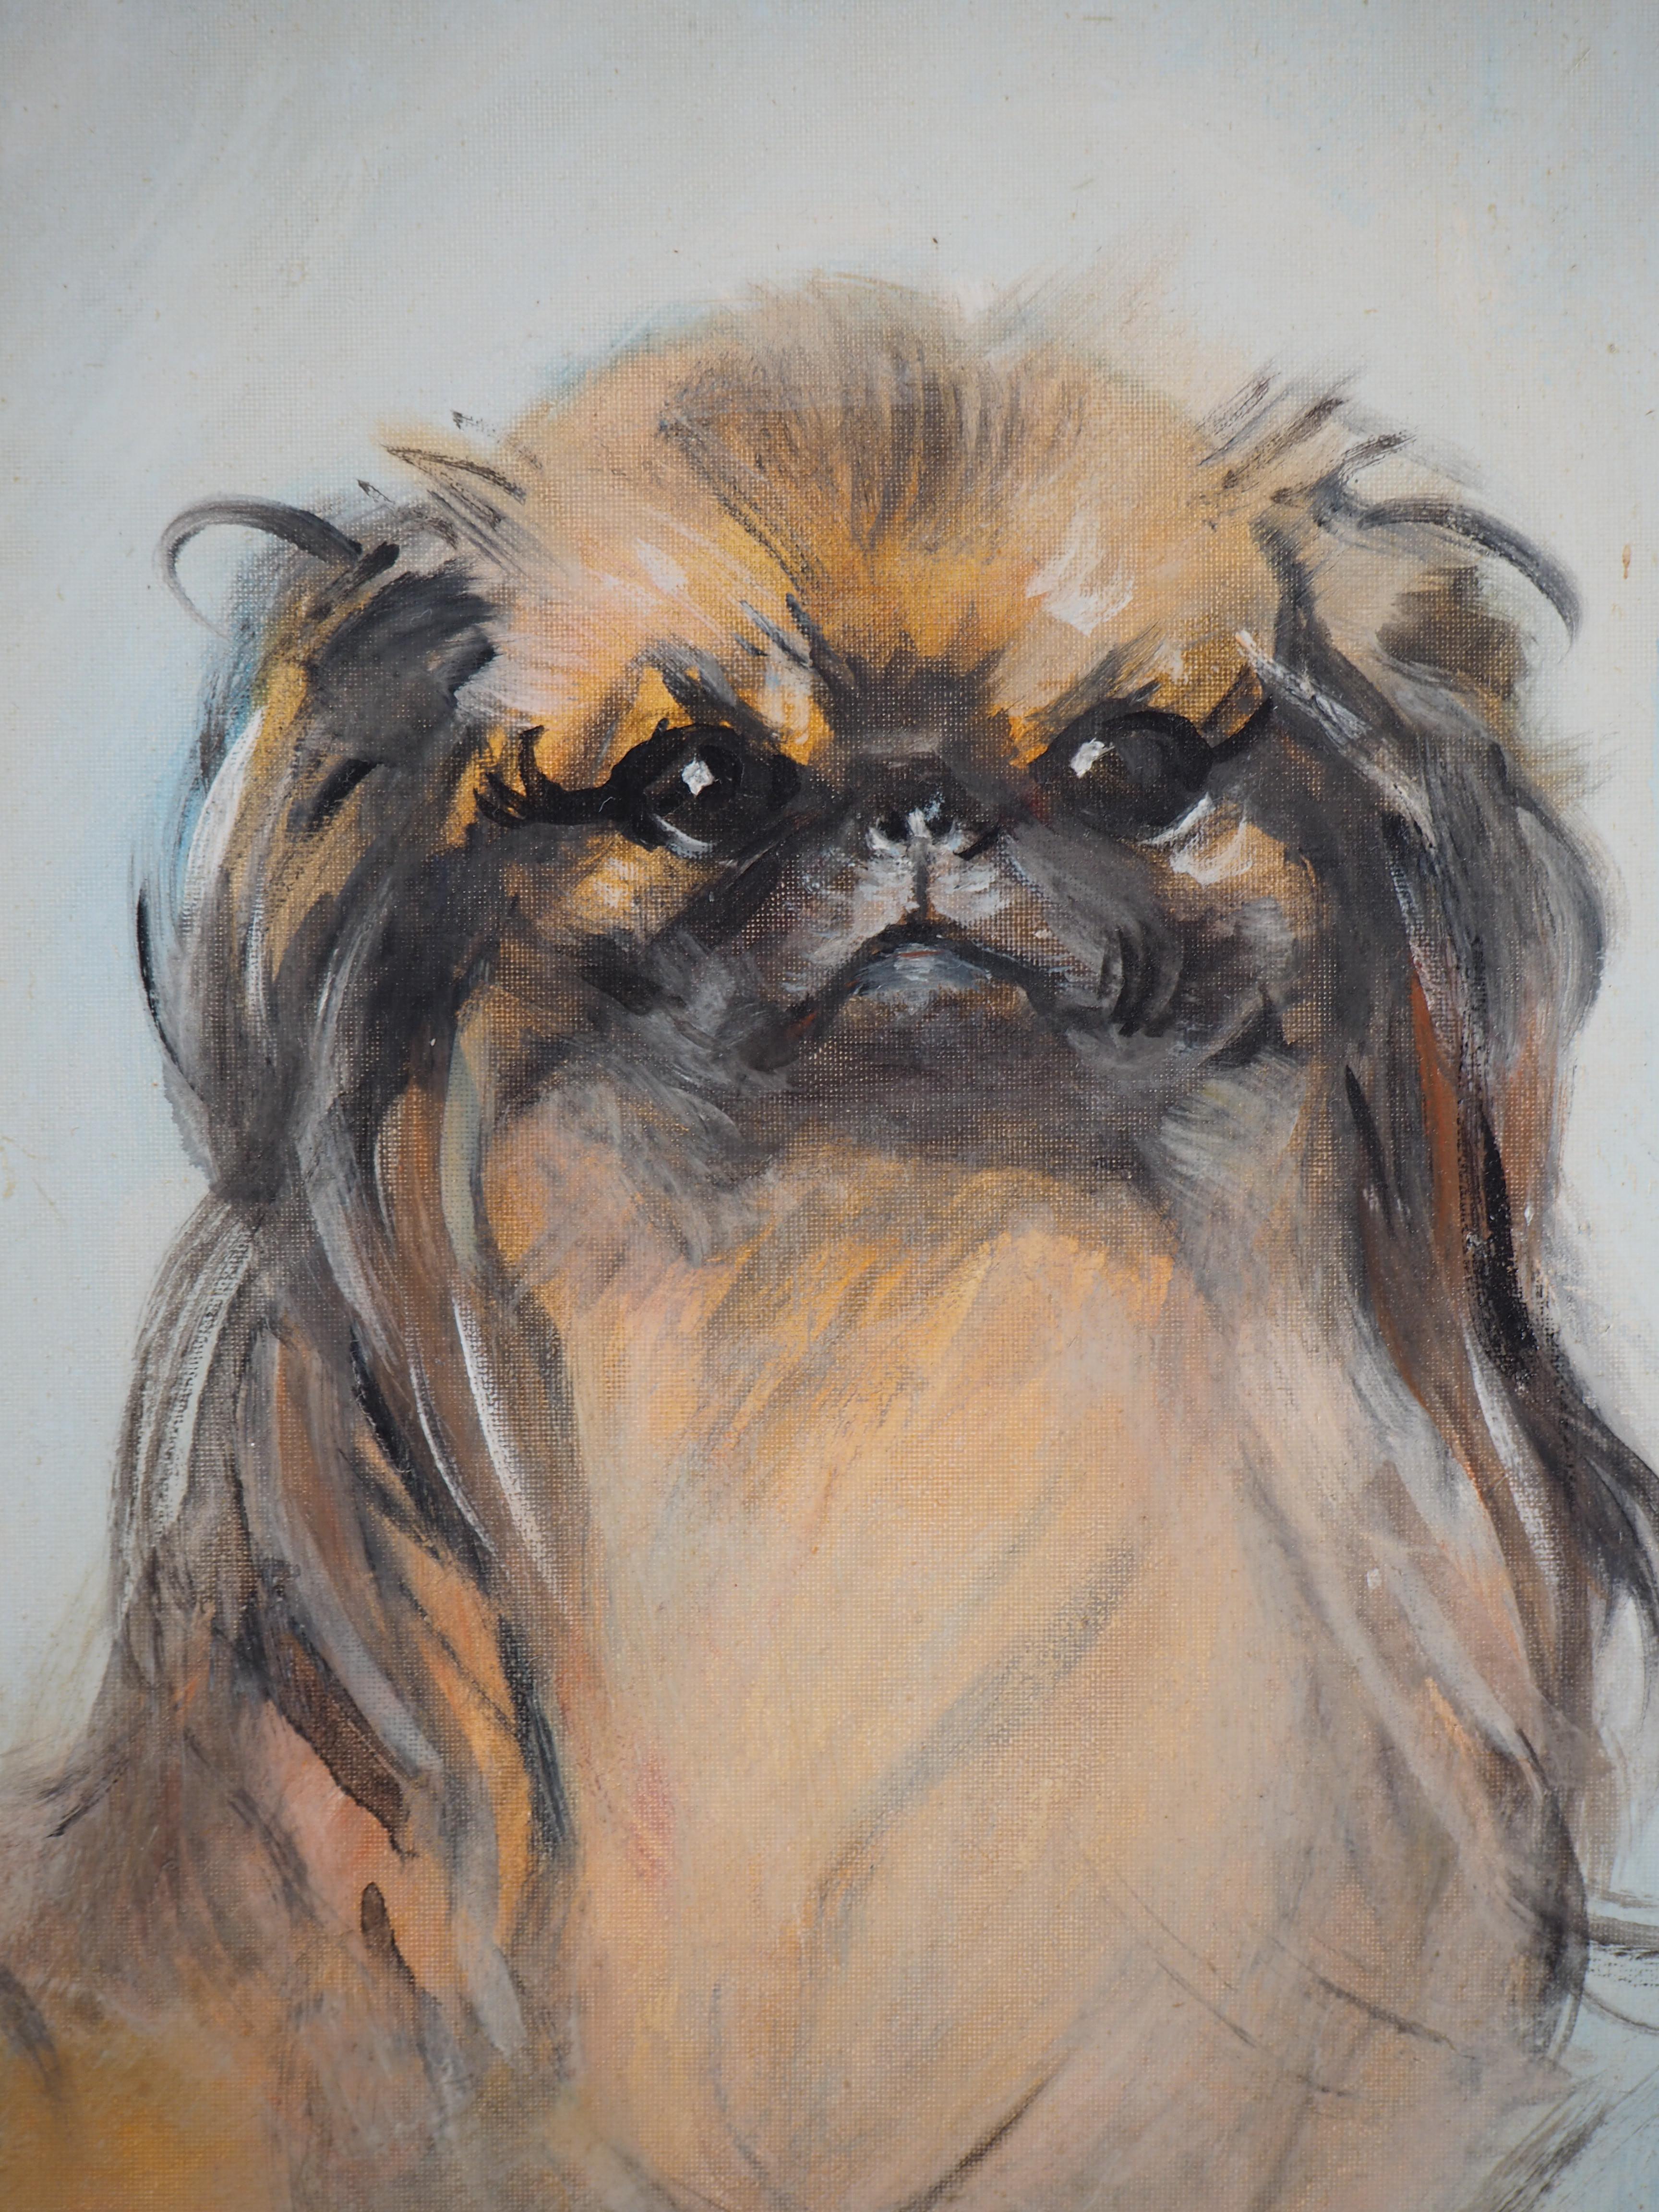 Jean-Gabriel DOMERGUE
Ku-Zee, The Pekinese Dog

Original oil painting
Handsigned bottom right
Titled on the back, with signed dedication
On panel 32 x 24 cm (c. 13 x 10 in)
With frame 39 x 30 cm (c. 16 x 12 in)

Very good condition, minor use to the